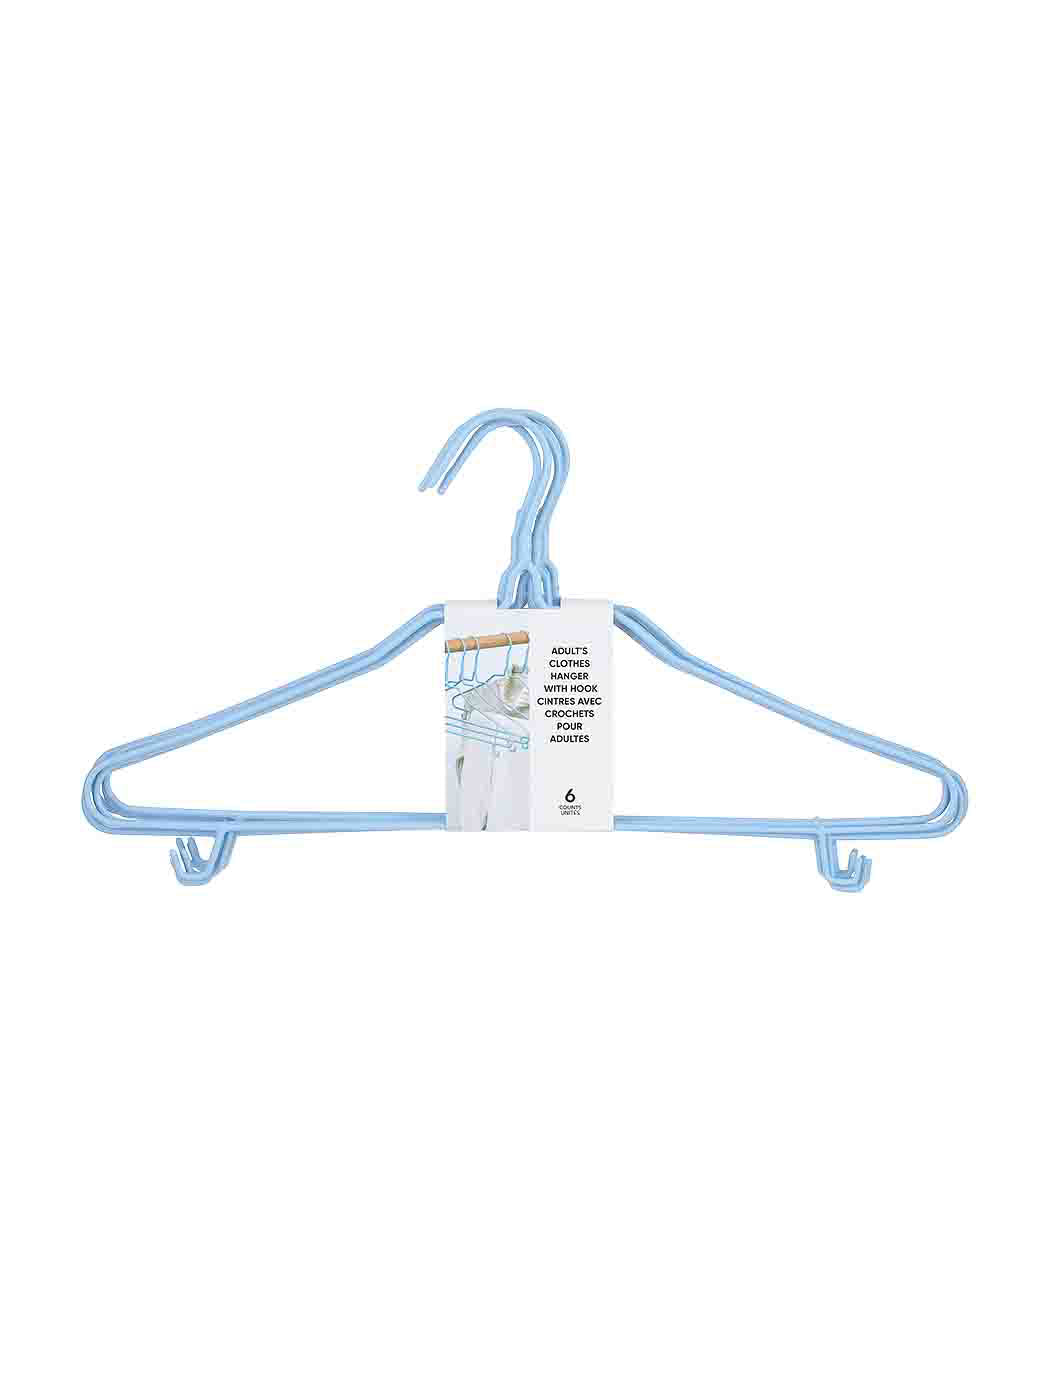 MINISO ADULT'S CLOTHES HANGER WITH HOOK 6PCS(BLUE) 2010309410101 CLOTHES HANGERS